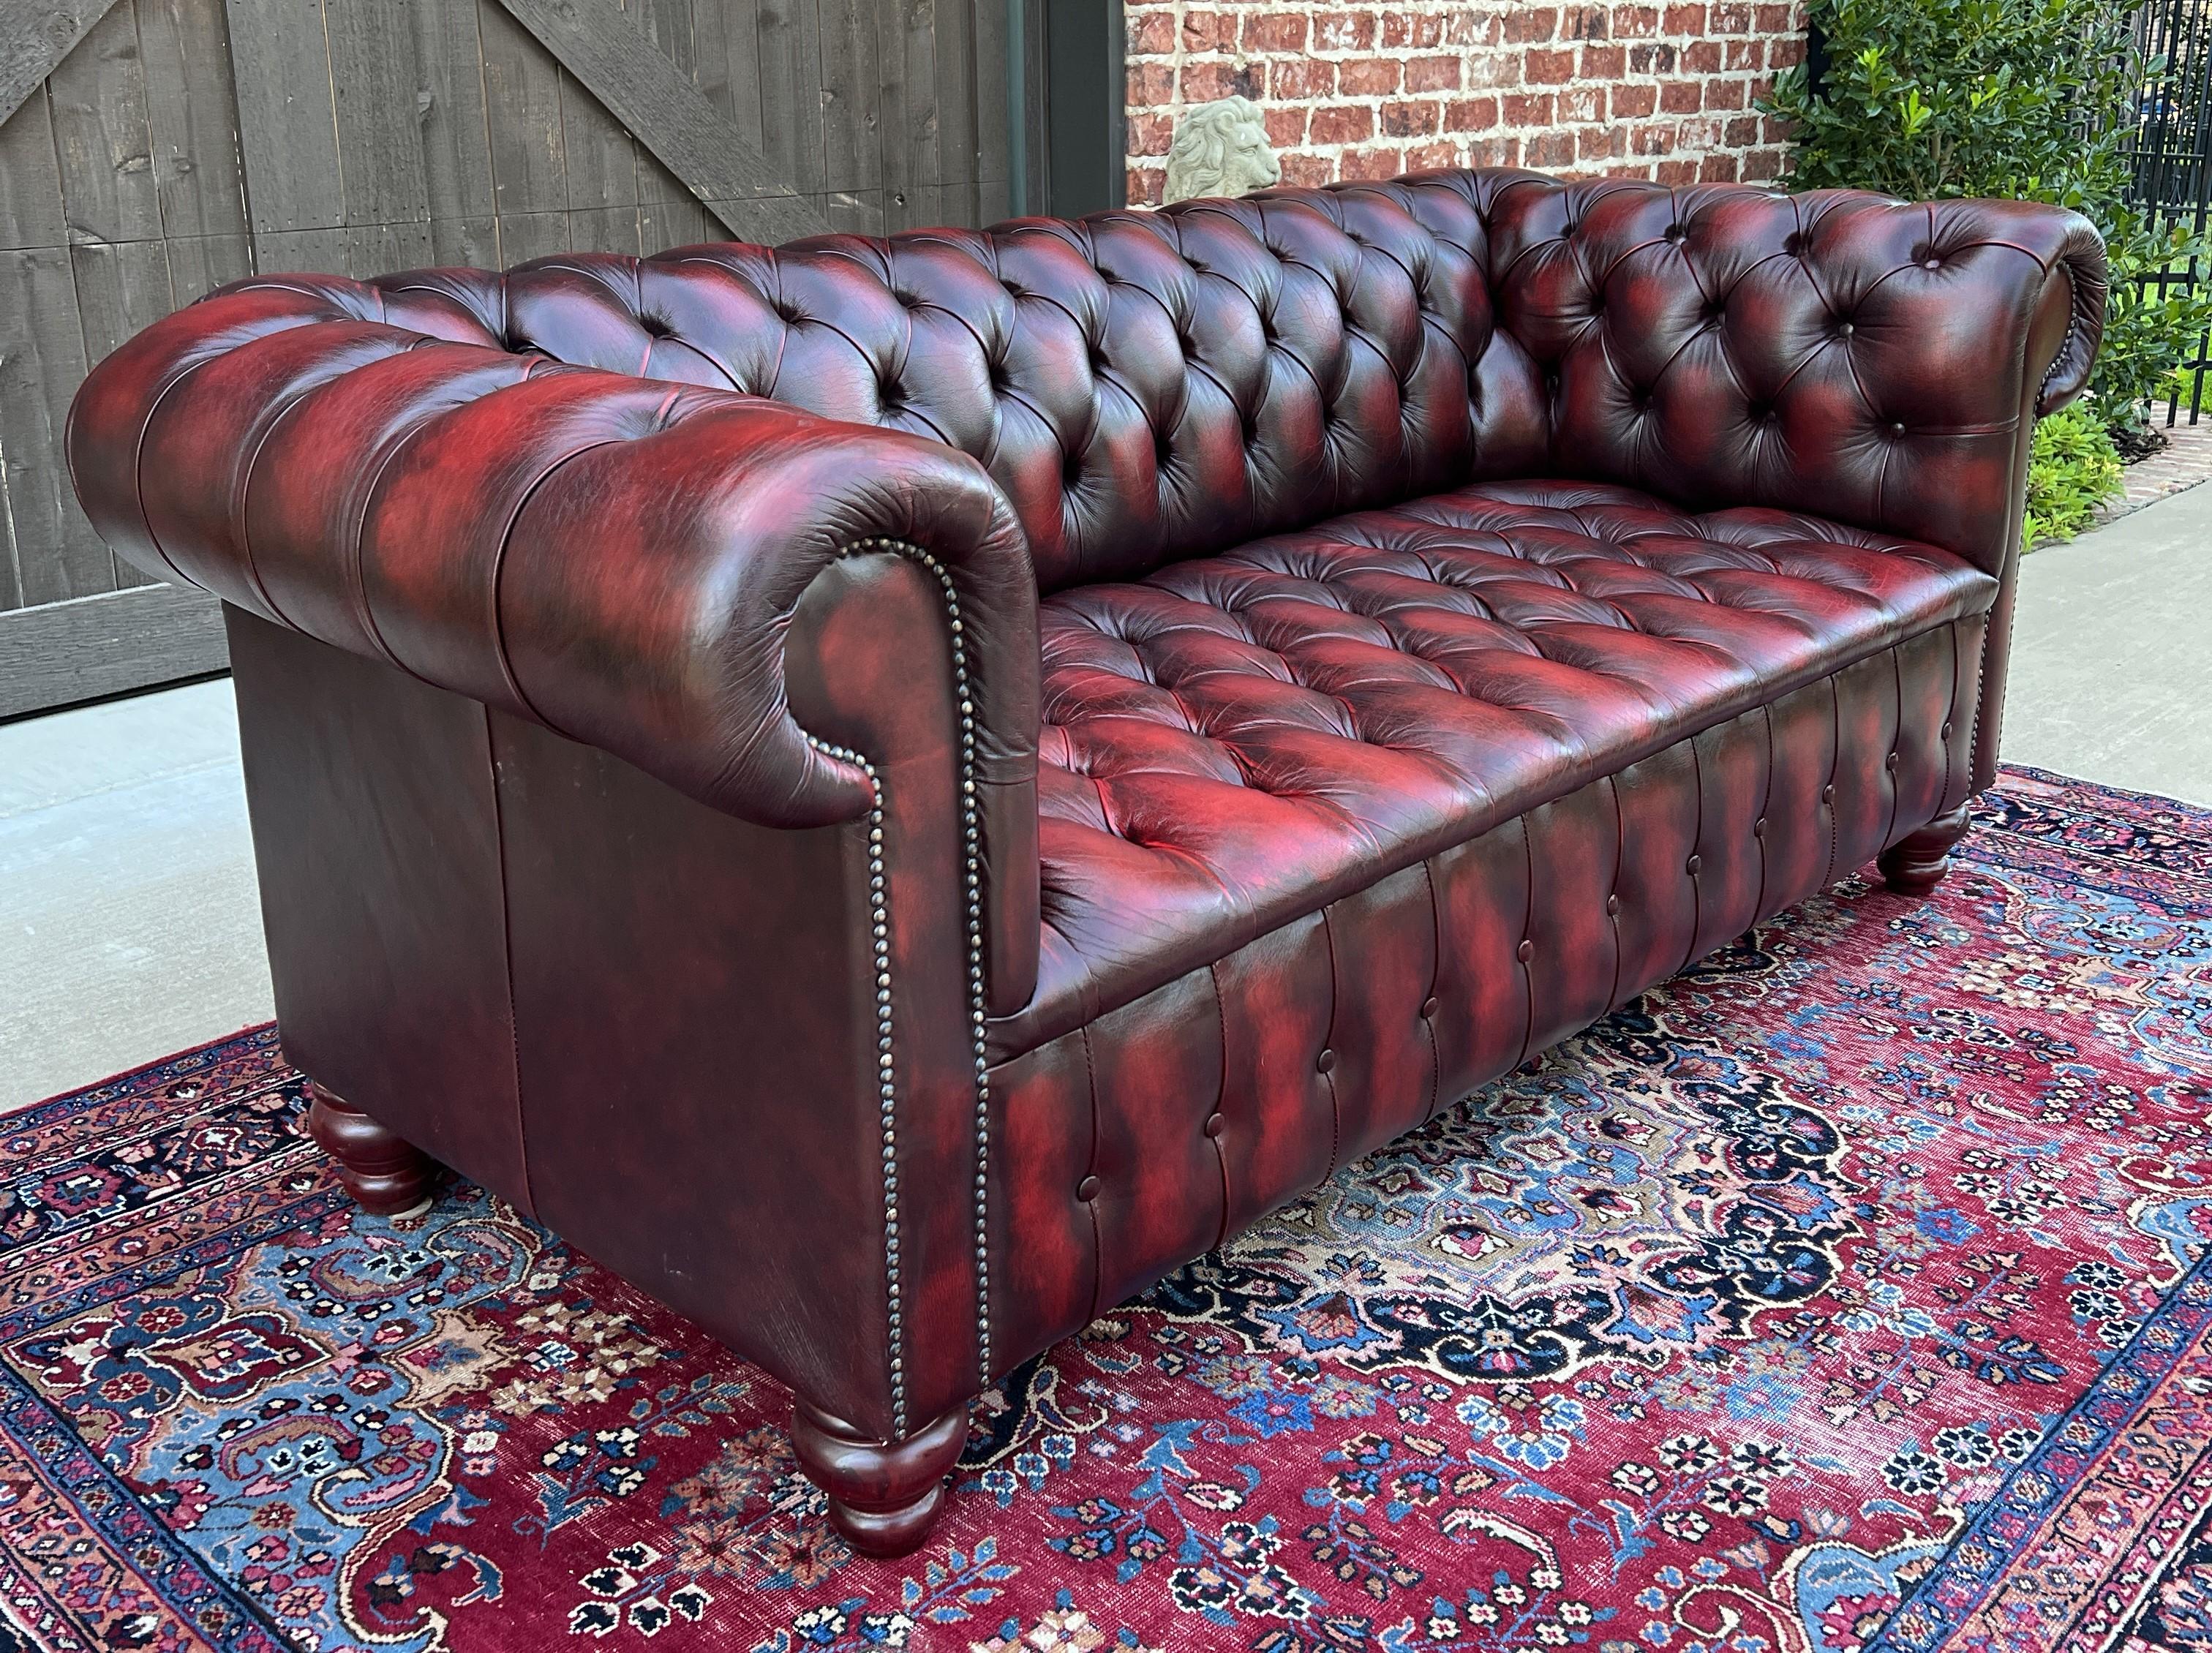 Vintage English Chesterfield Leather Sofa Tufted Seat Oxblood Red Mid-Century #2 3